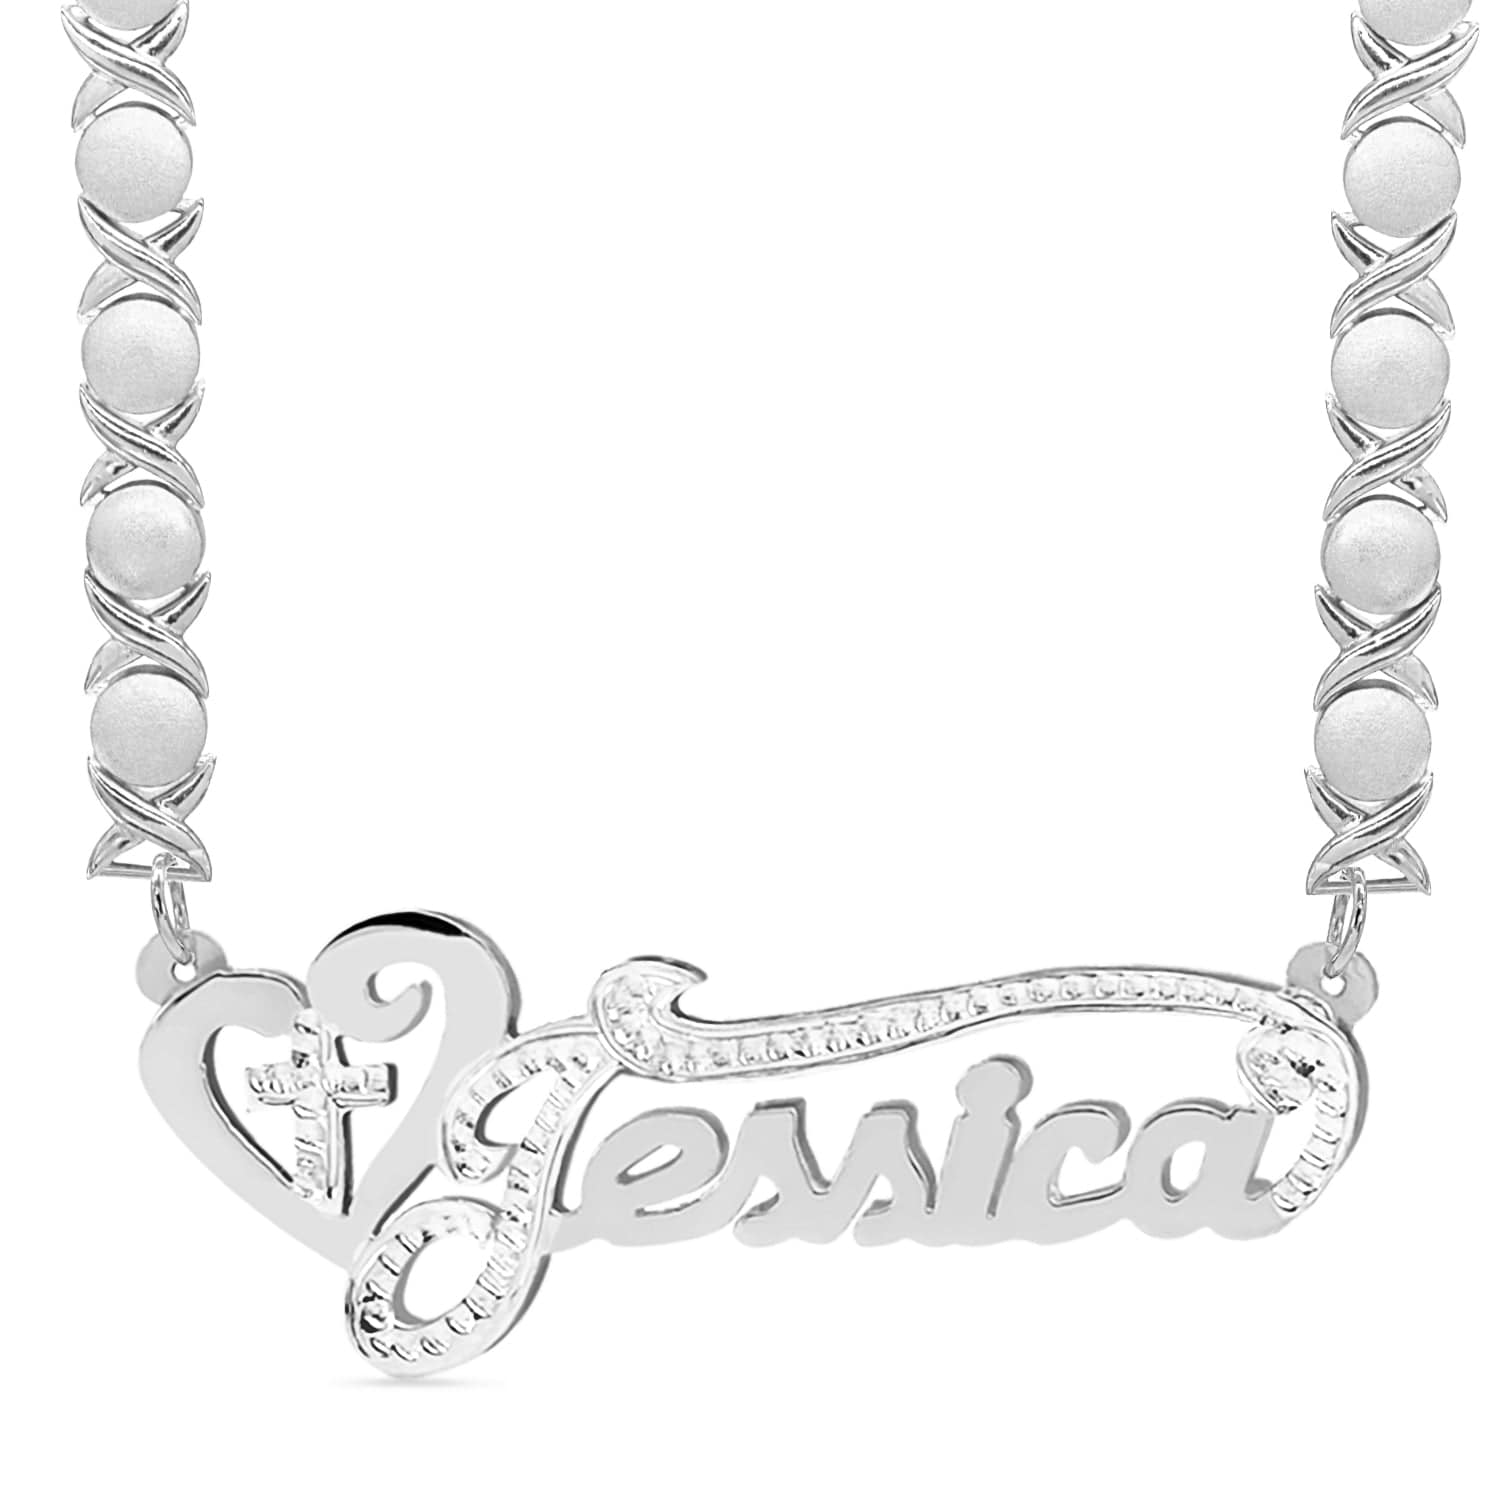 14k Gold over Sterling Silver / Rhodium Xoxo Chain Double Plated Nameplate Necklace "Jessica" with Rhodium Xoxo chain